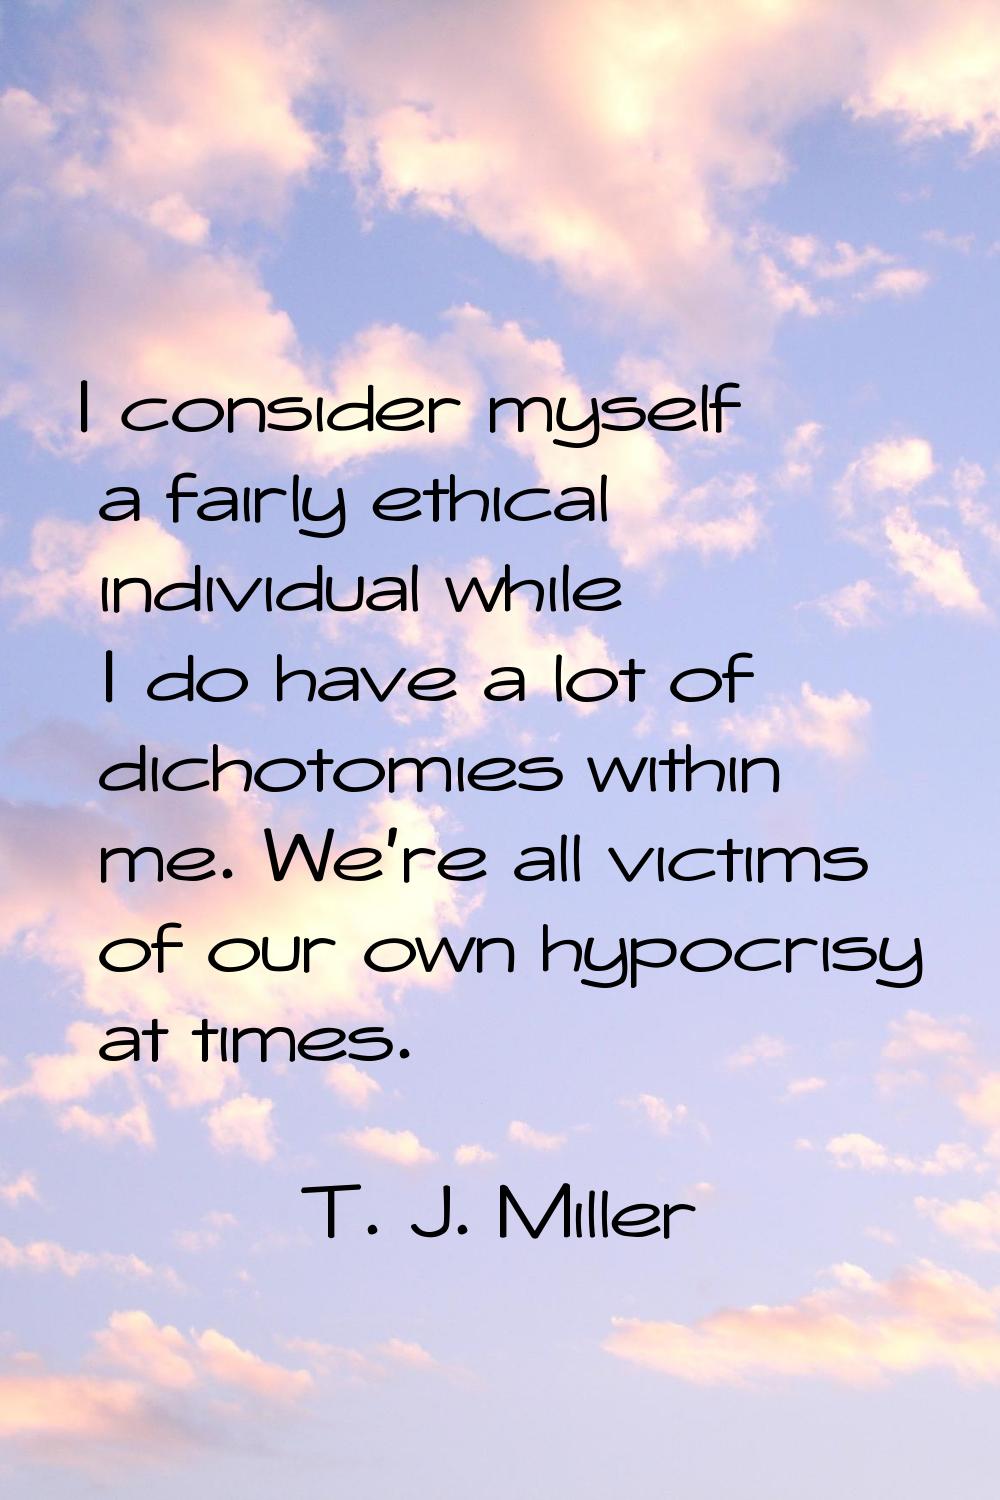 I consider myself a fairly ethical individual while I do have a lot of dichotomies within me. We're